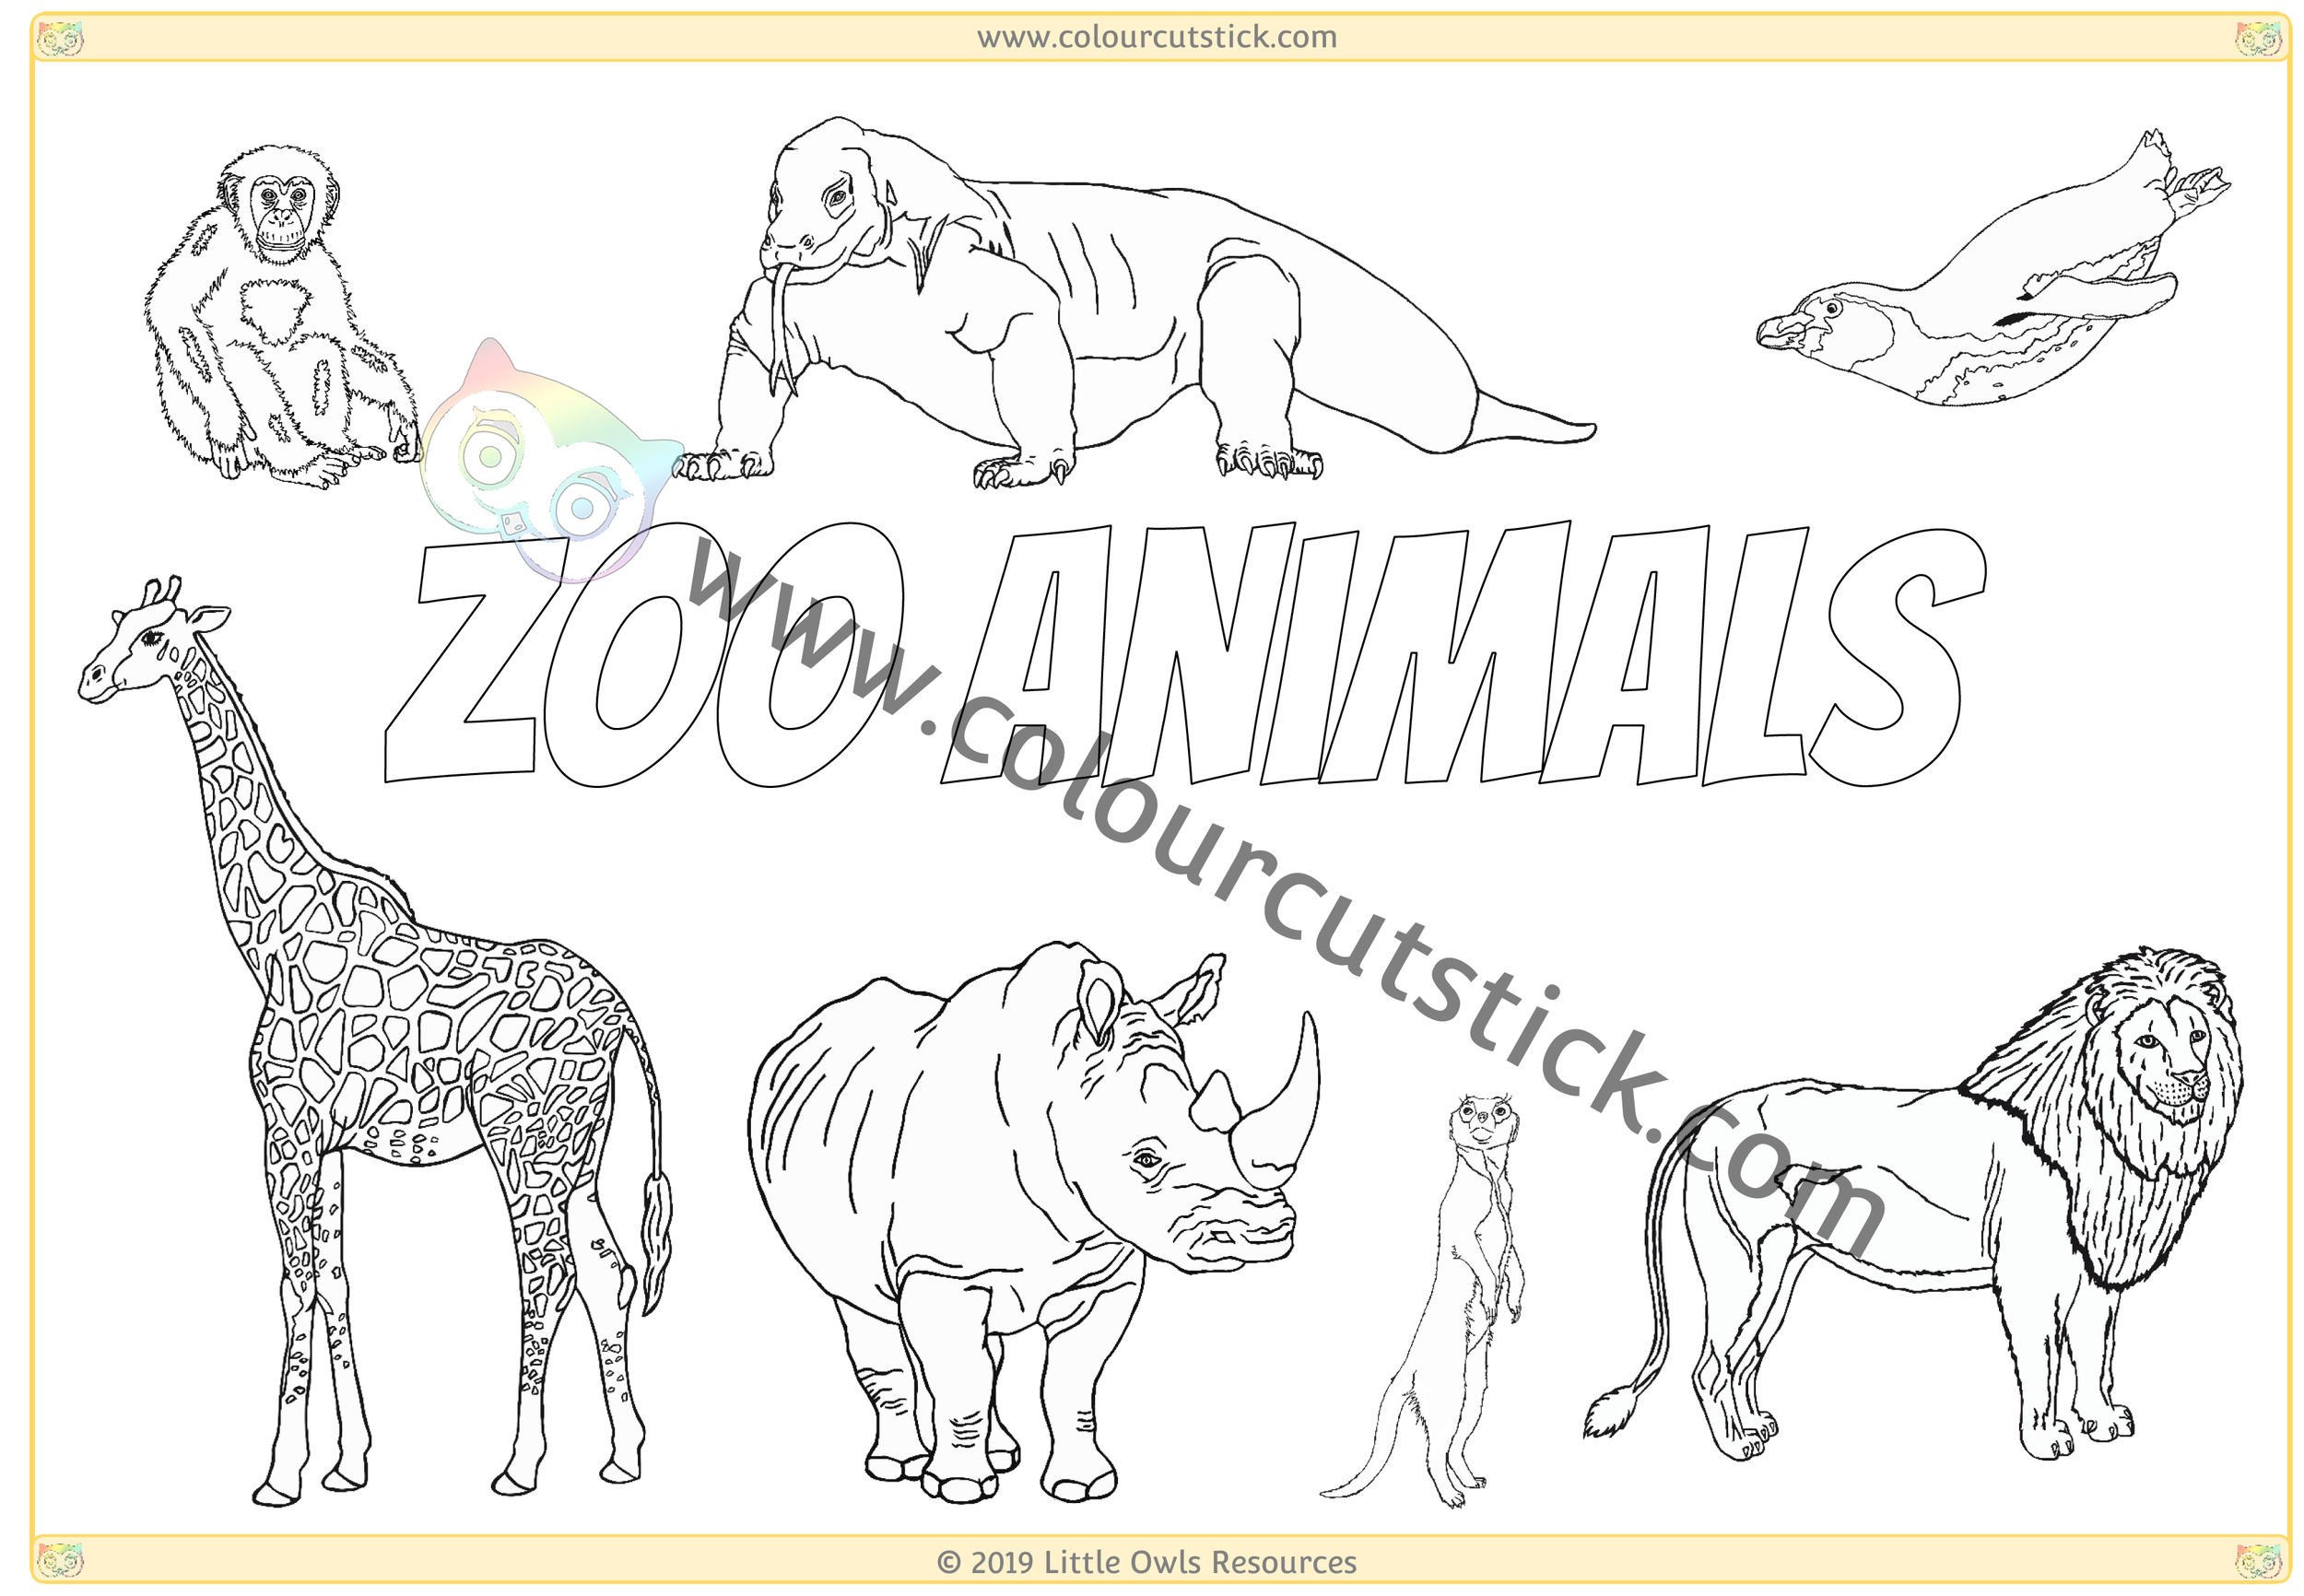 FREE Zoo Animals Colouring/Coloring Pages   for children, kids ...